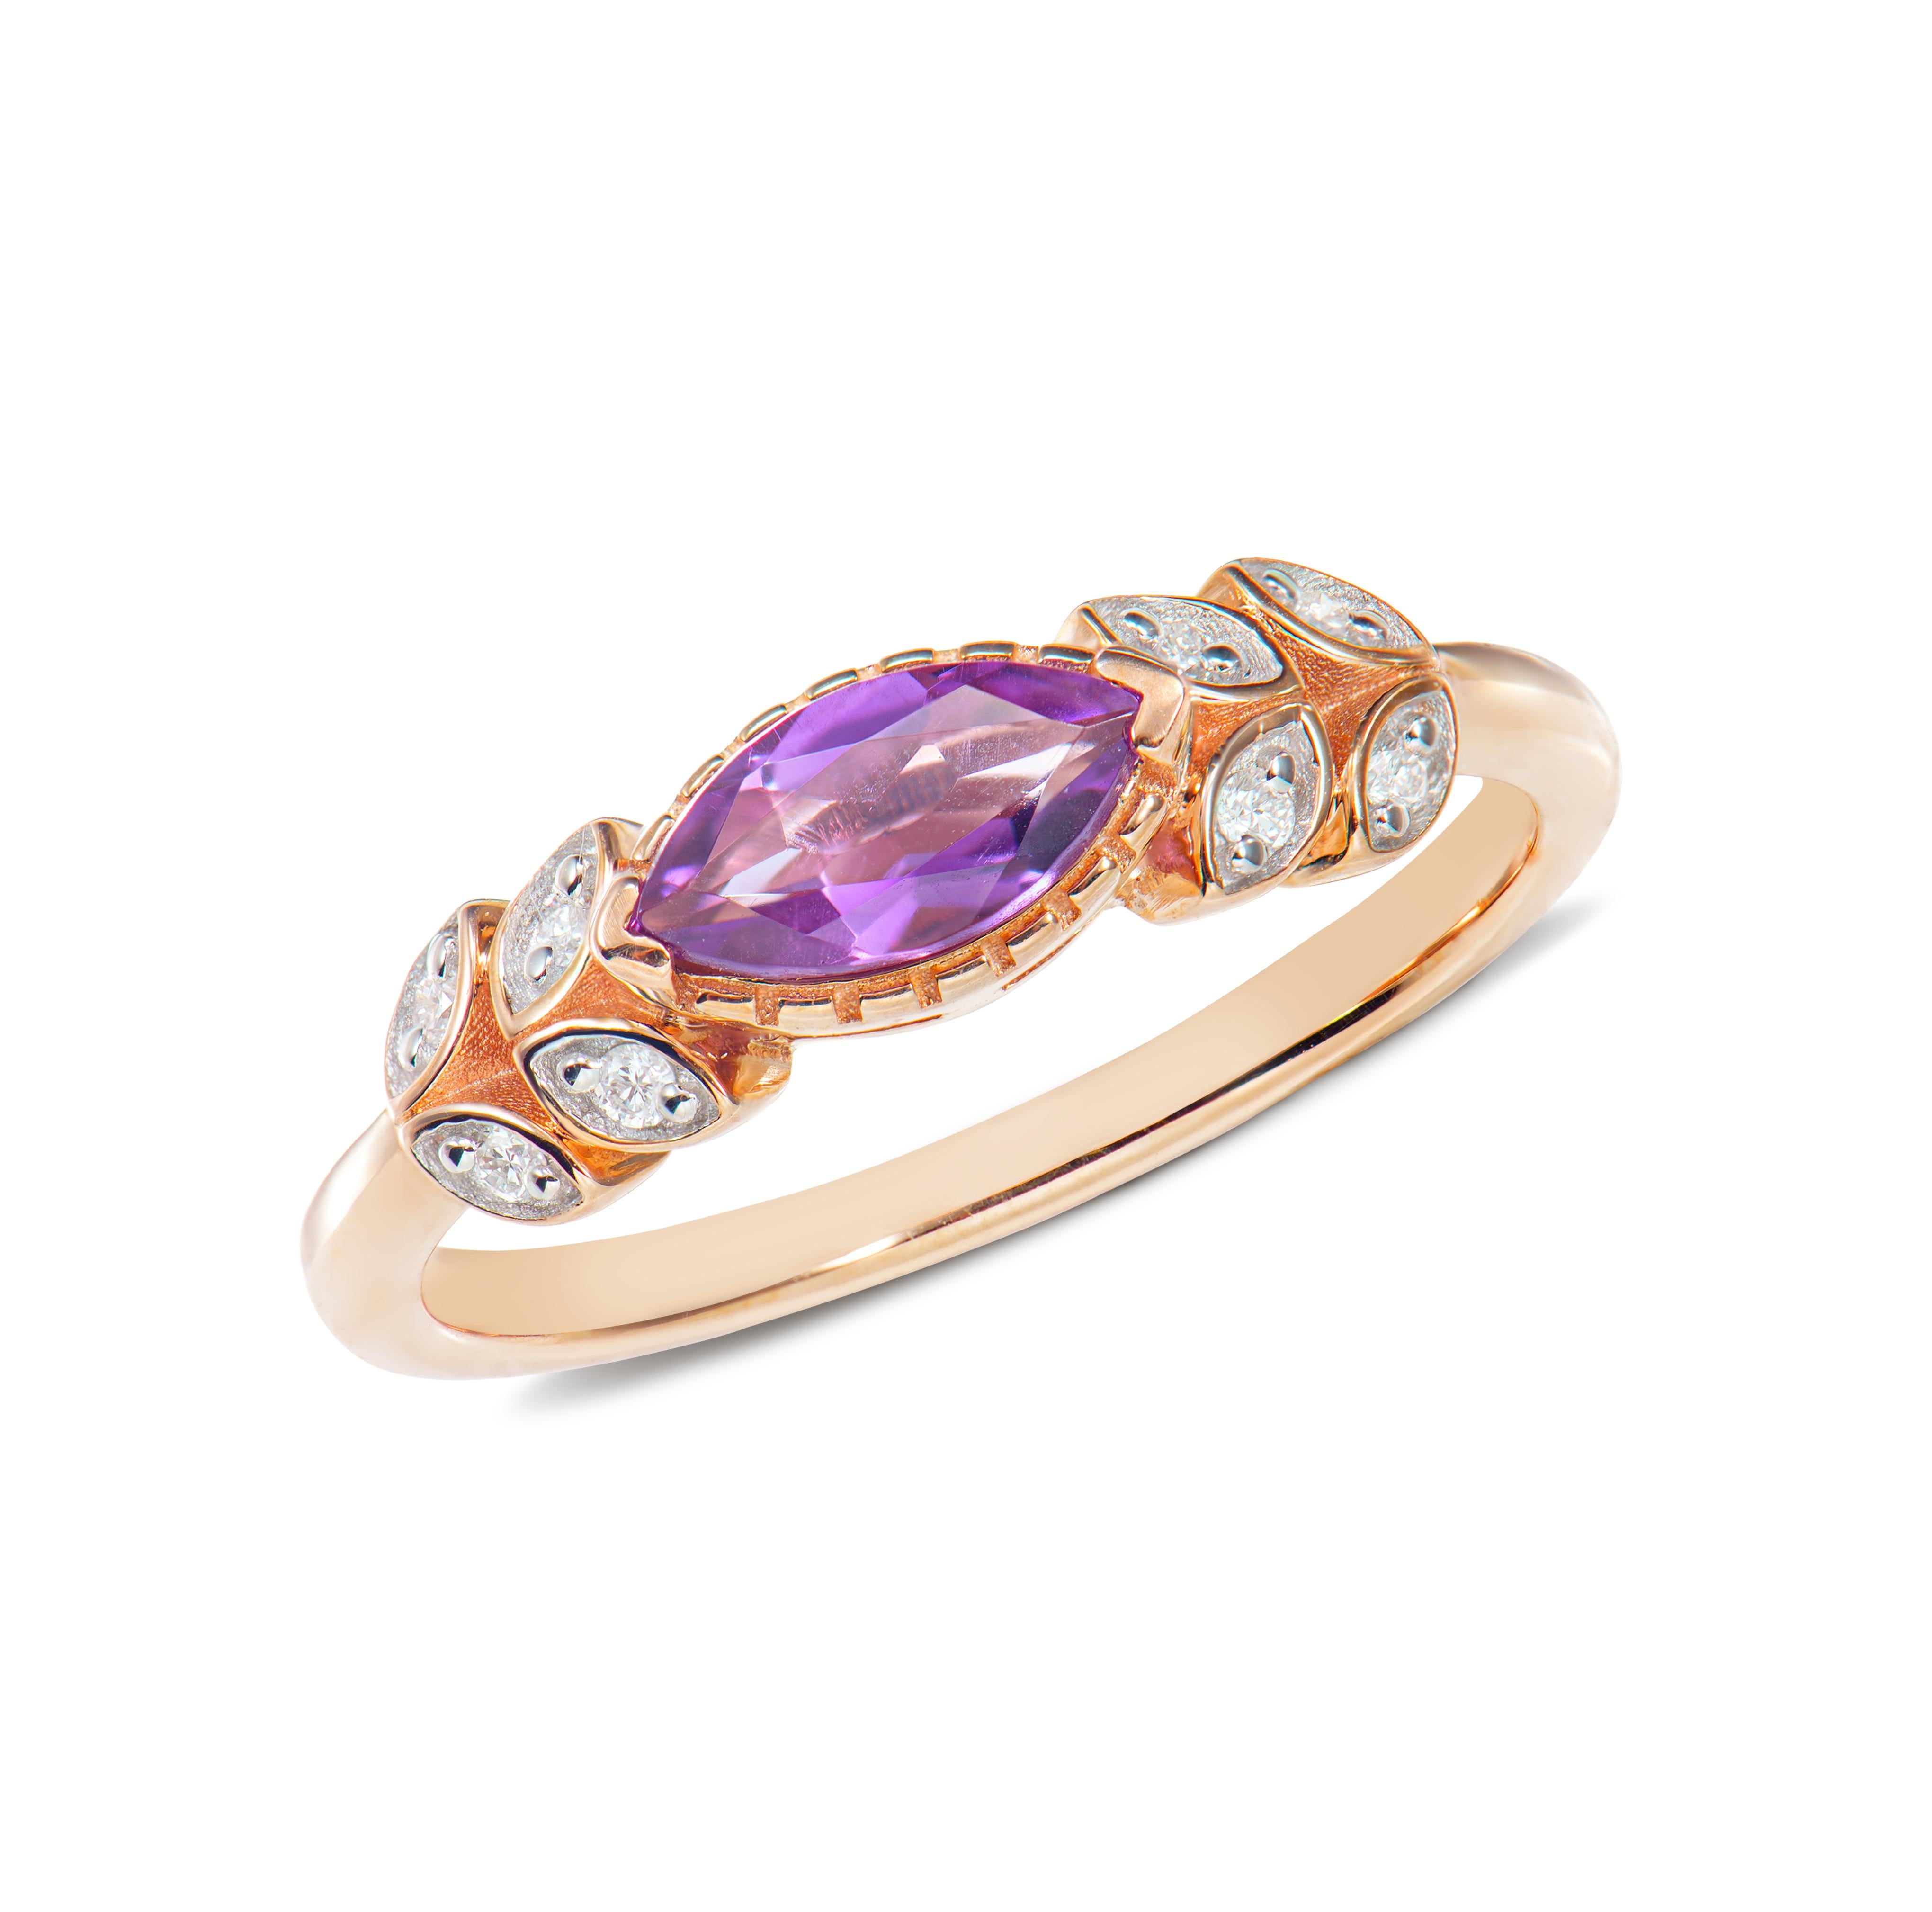 Marquise Cut 0.45 Carat Amethyst Fancy Ring in 14Karat Rose Gold with White Diamond.   For Sale